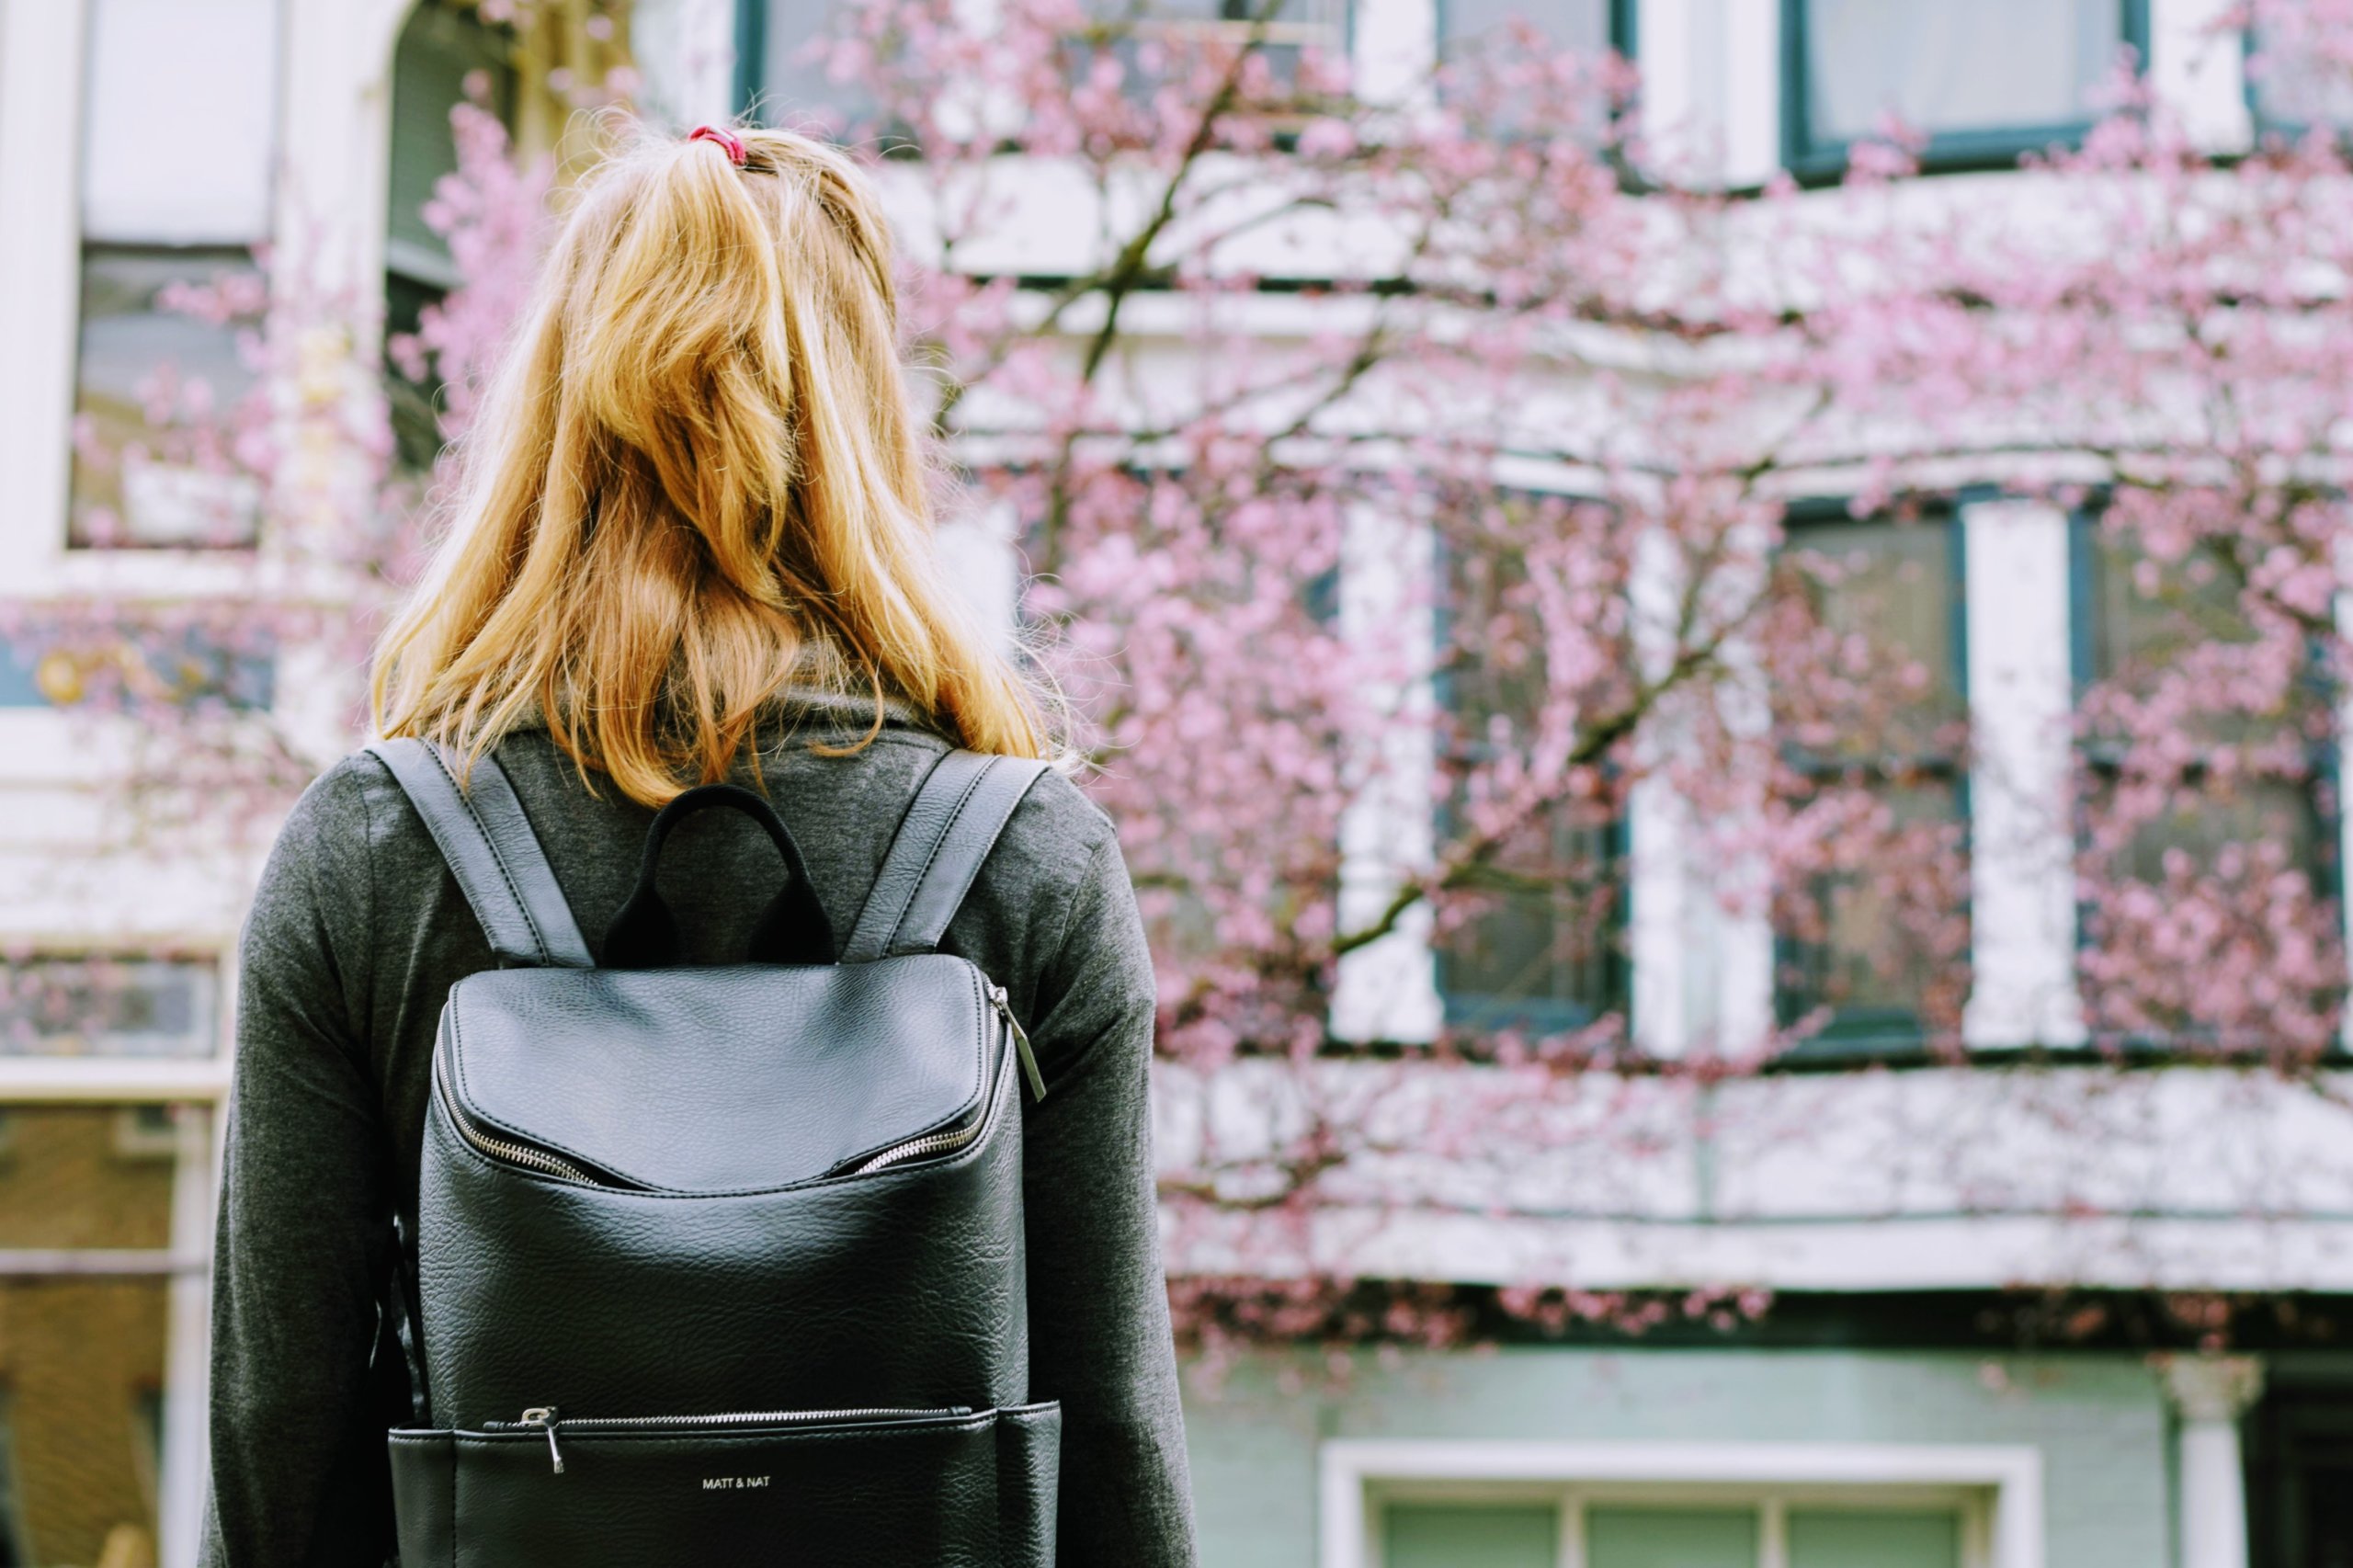 On-Campus Resources for Stalking: How Safe Do You Feel On Campus?